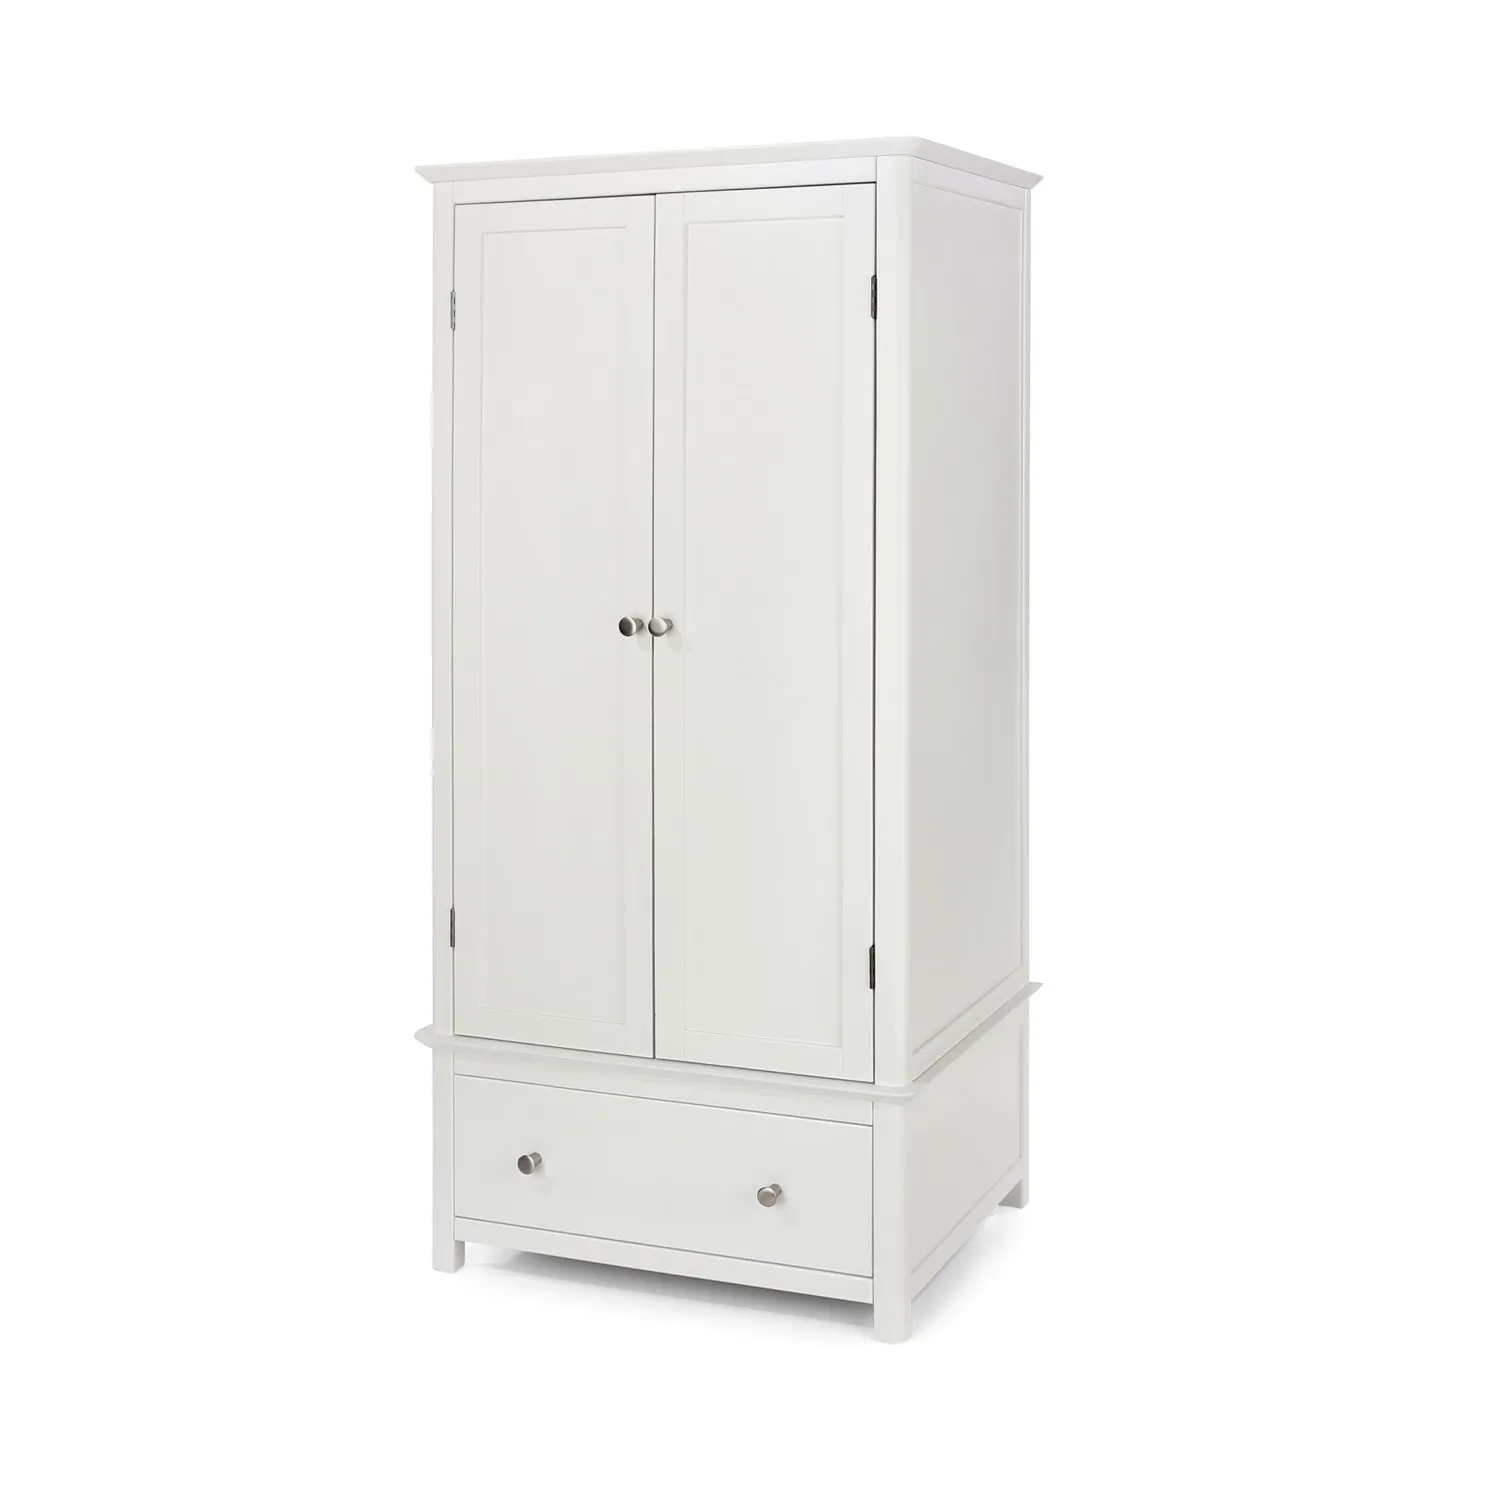 Modern 2 Door 1 Drawer White Painted Double Combi Wardrobe 190cm Tall